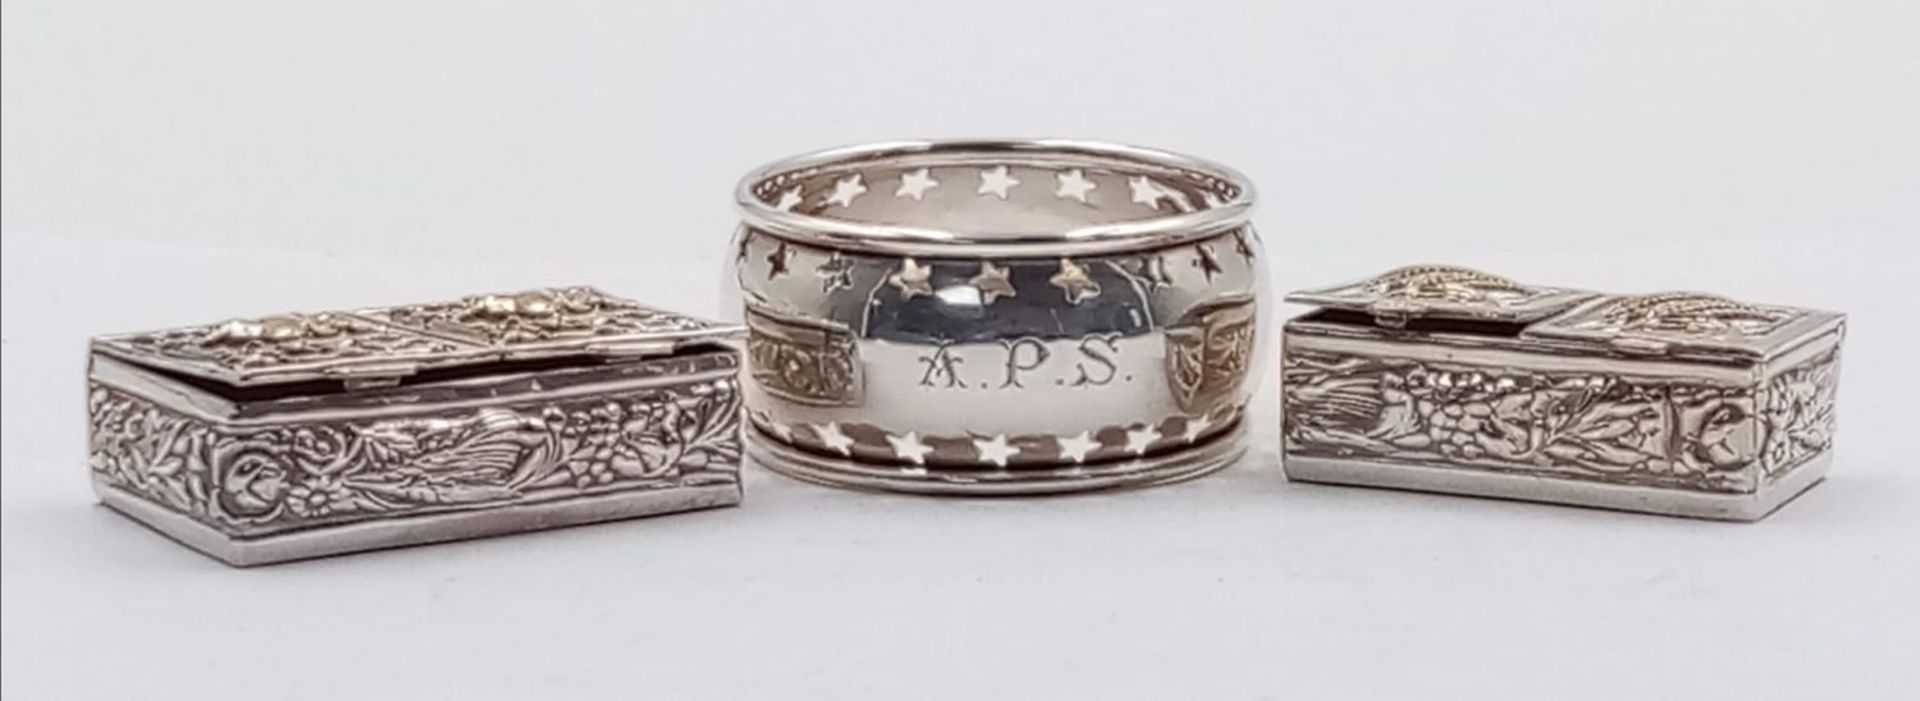 A Sterling Silver Antique Napkin Ring and Two Ornate decorative Silver Plate Double-Lidded Pill - Image 2 of 4